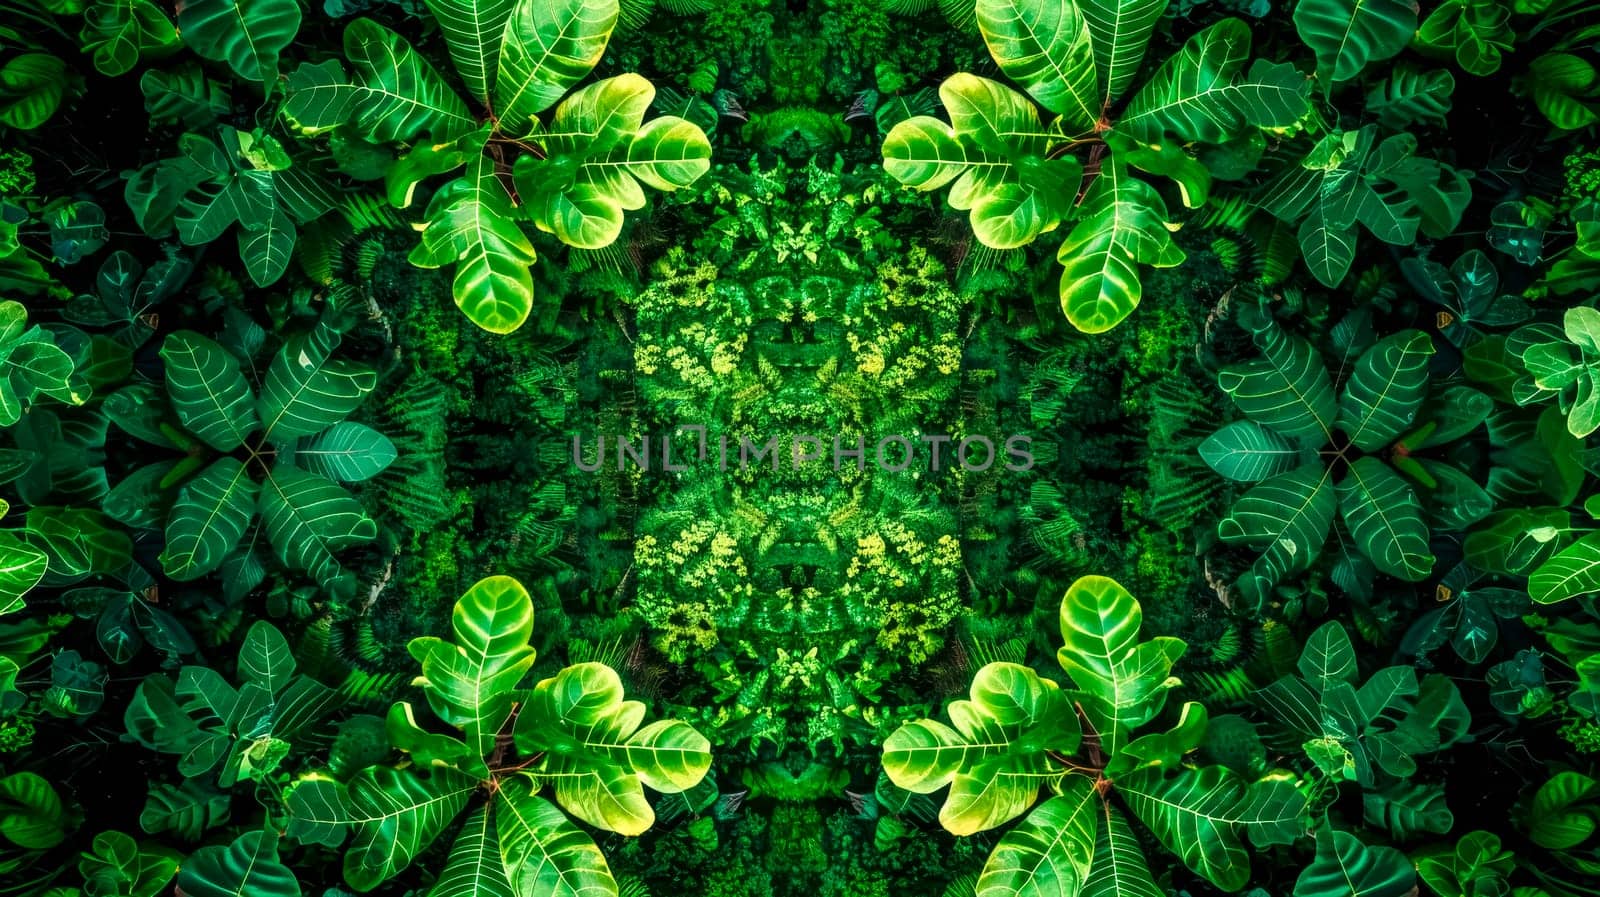 Vibrant green leaves arranged in a symmetrical pattern, perfect for a natural background